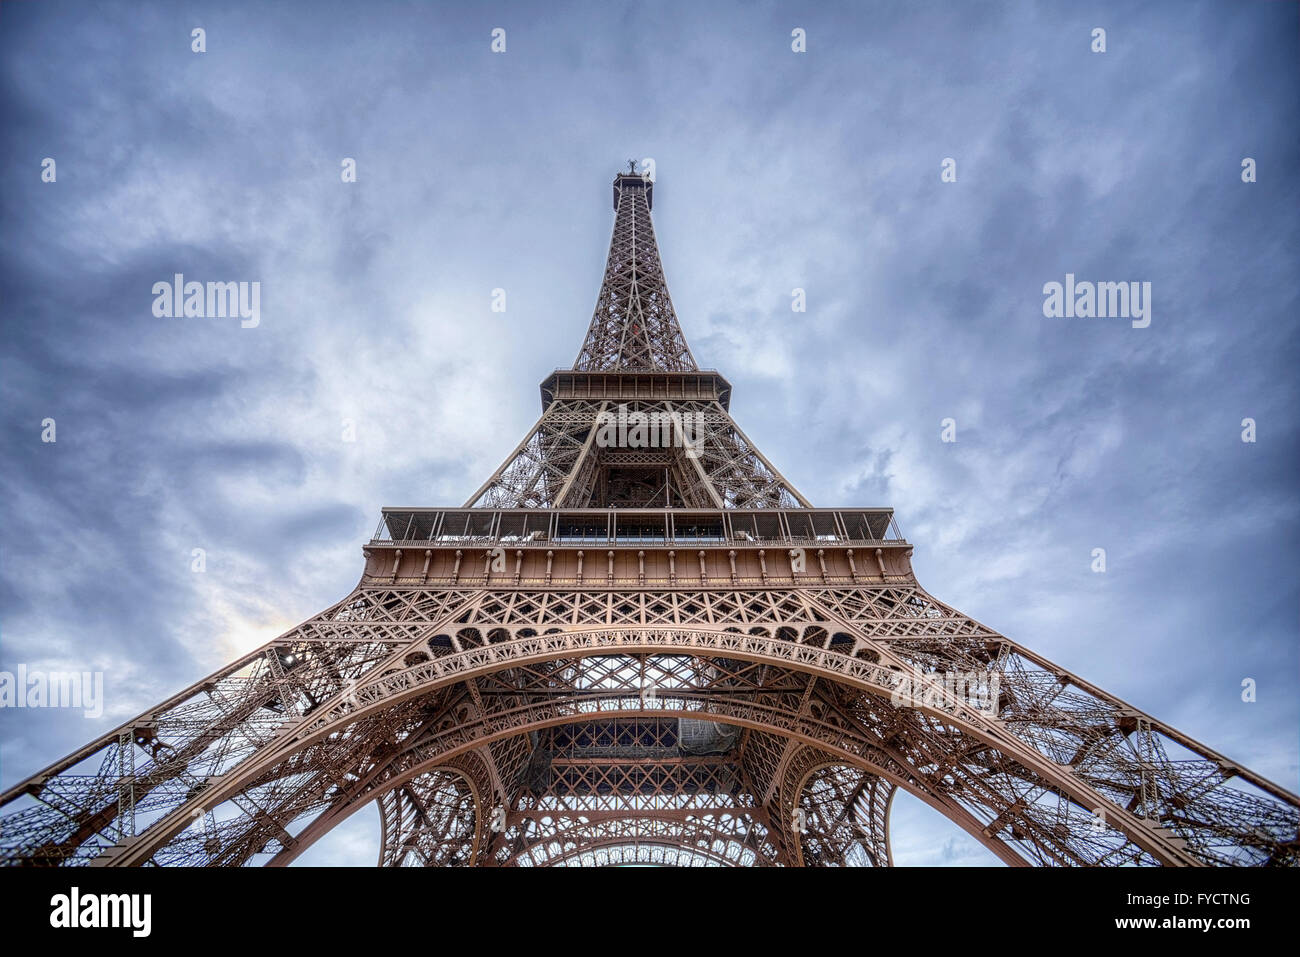 Looking up at the Eiffel Tower against wispy clouds in a blue sky. Stock Photo